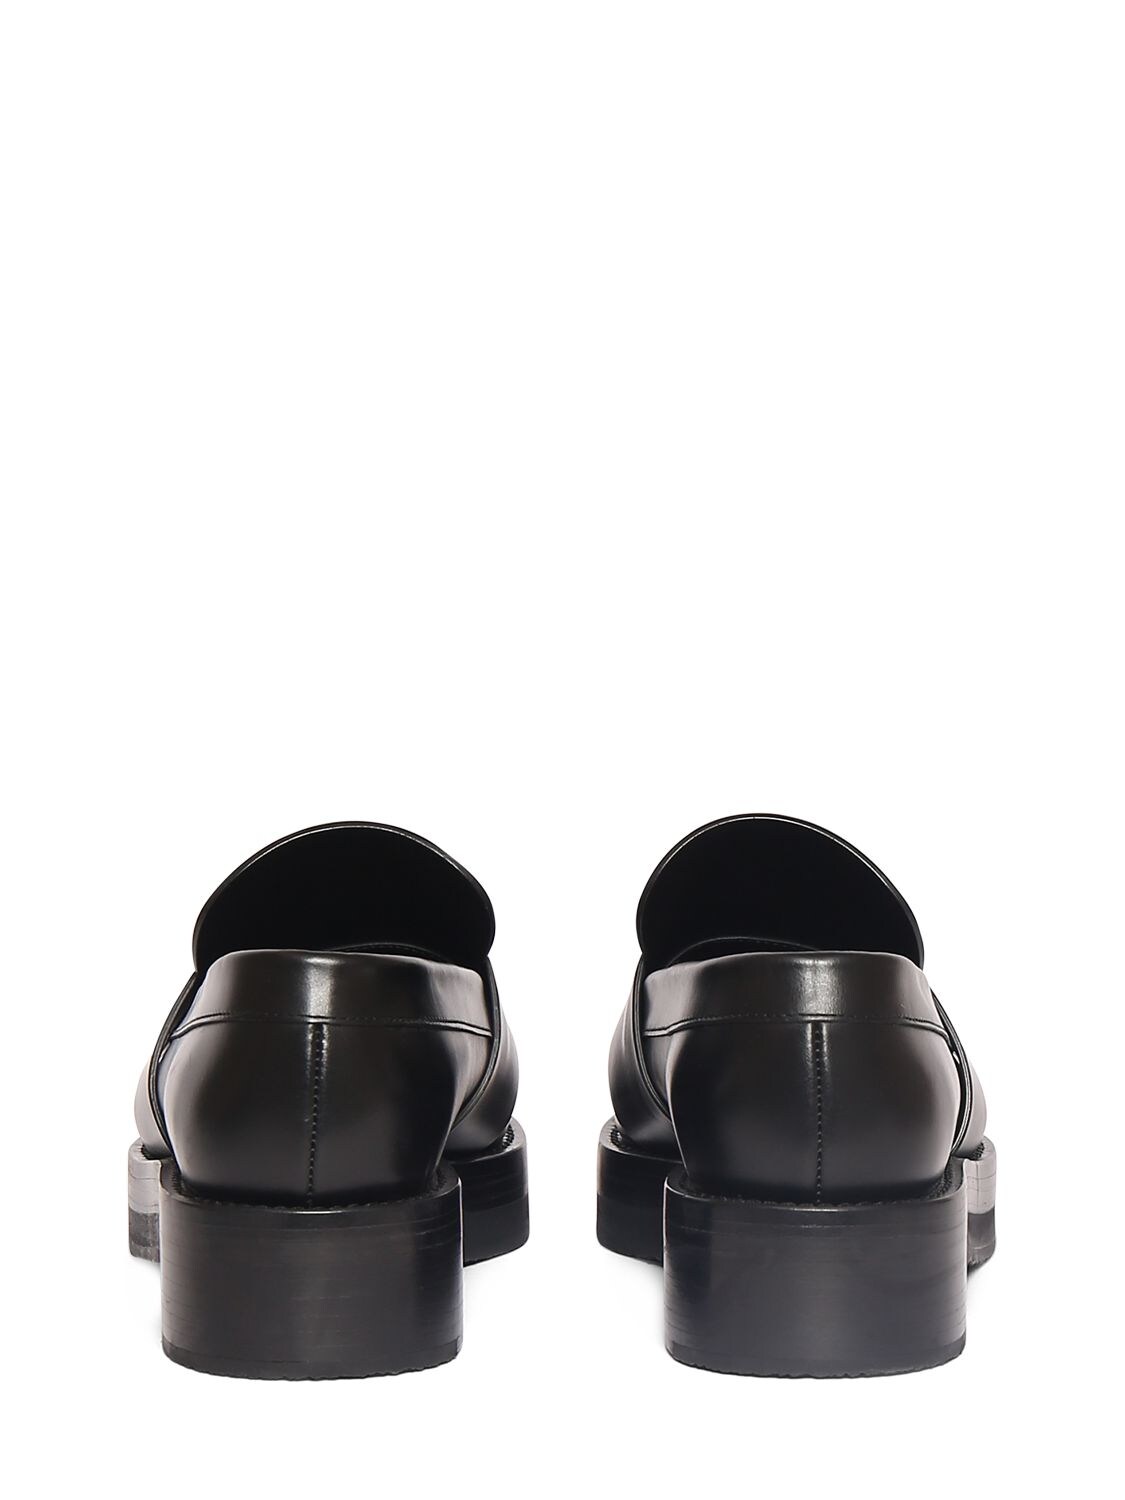 Shop Balmain Ben Leather Loafers In Black